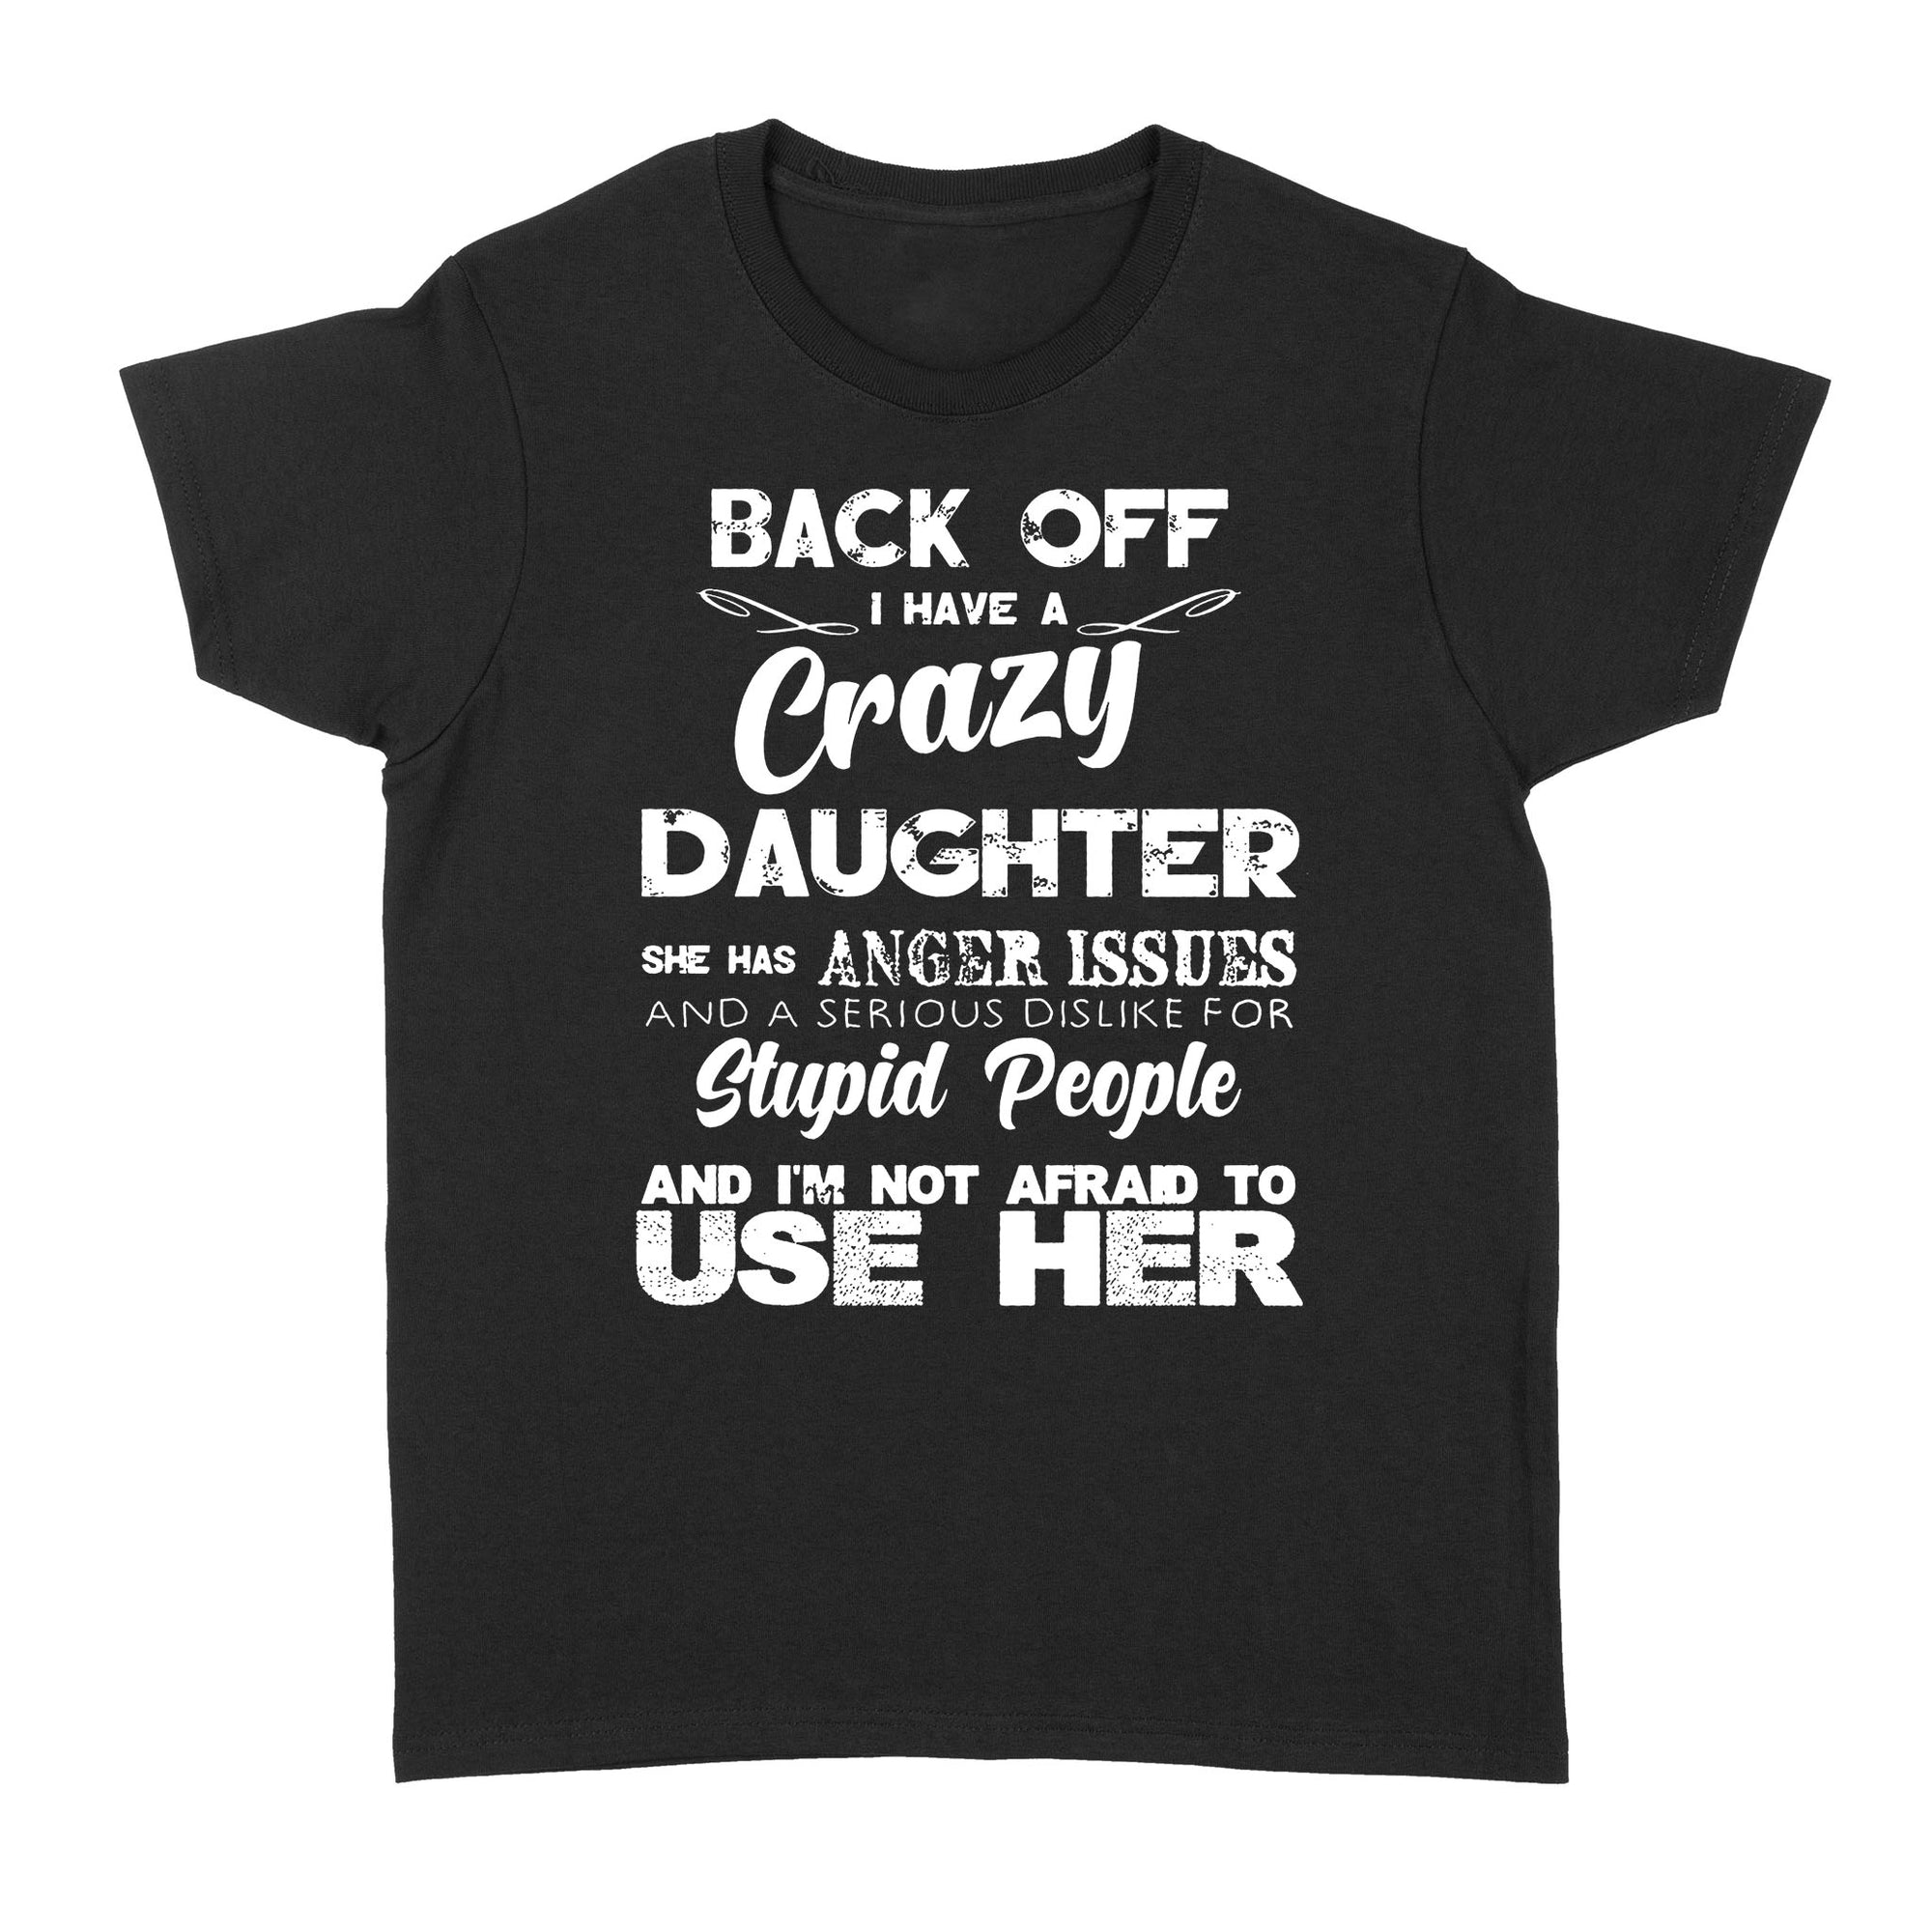 Funny I Have A Crazy Daughter She Has Anger Issues Quote Saying Slogan Custom Graphic Design Gift Ideas For Dad Mom Grandma Grandpa - Standard Women's T-shirt